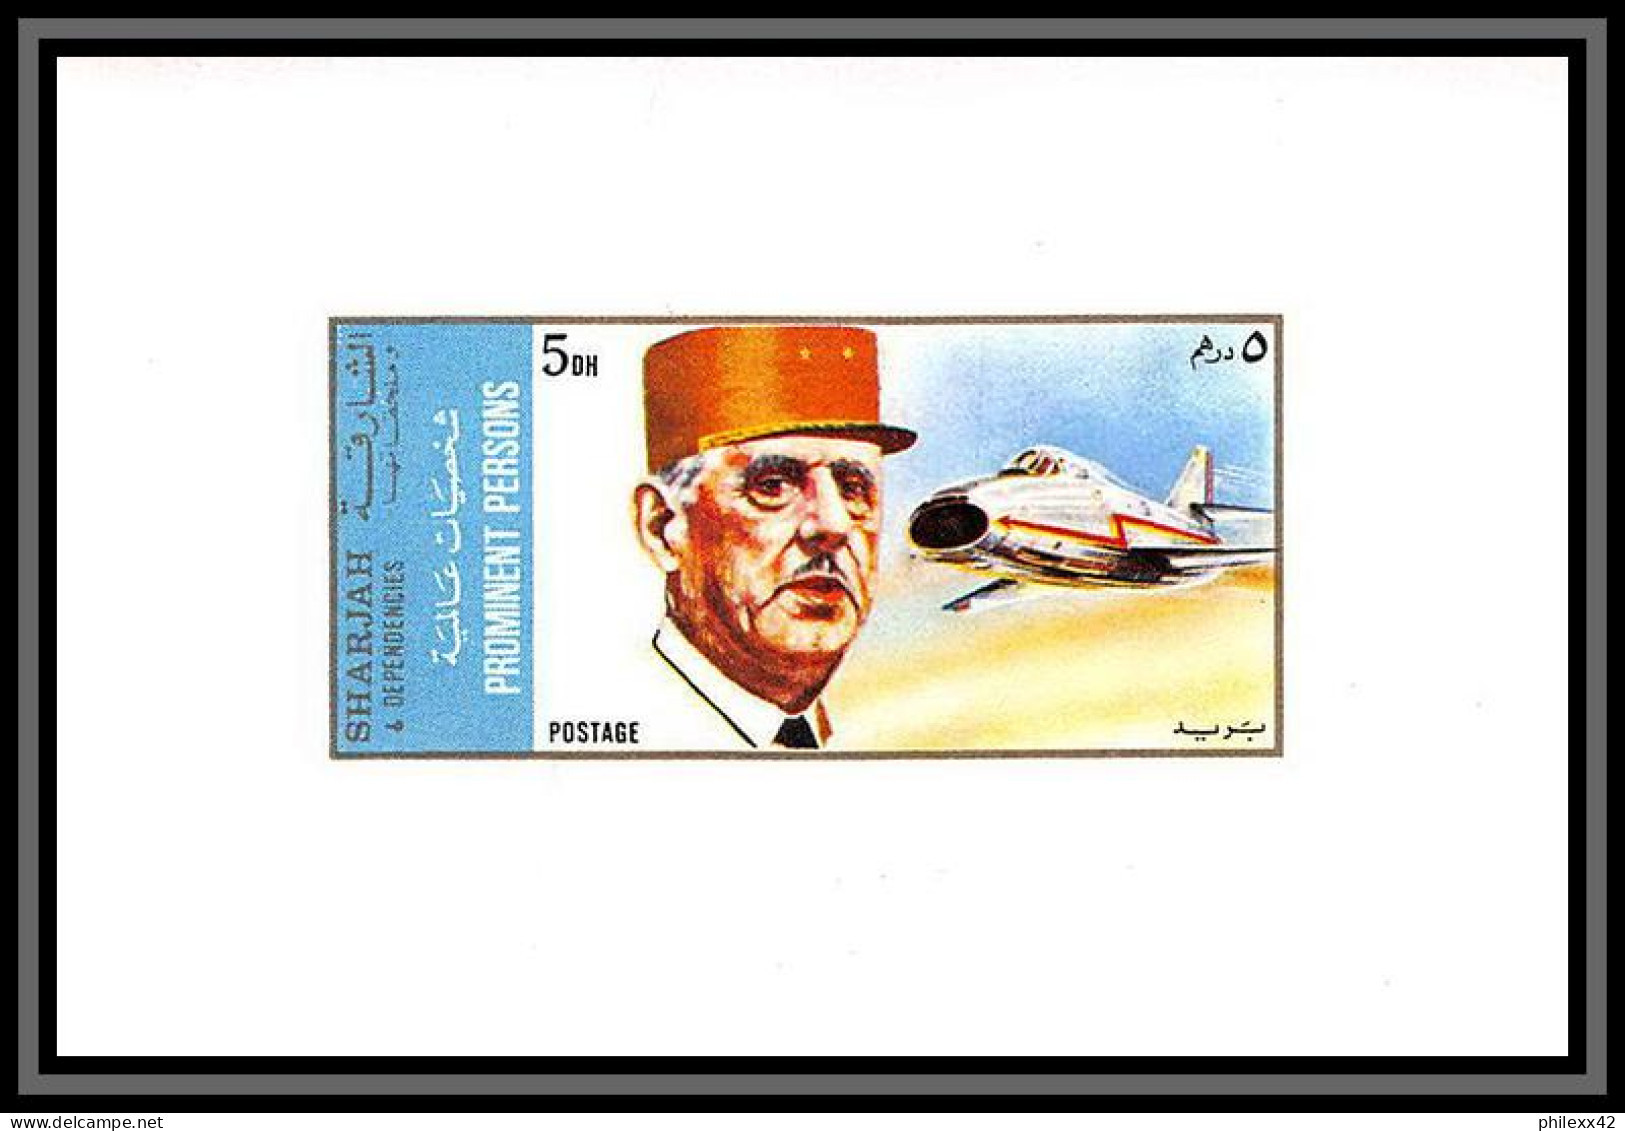 Sharjah - 2173/ N° 882/887 De Gaulle And Aircraft Avions Helicpter Rafale Mirage Concorde Deluxe Sheets Neuf ** MNH - De Gaulle (General)